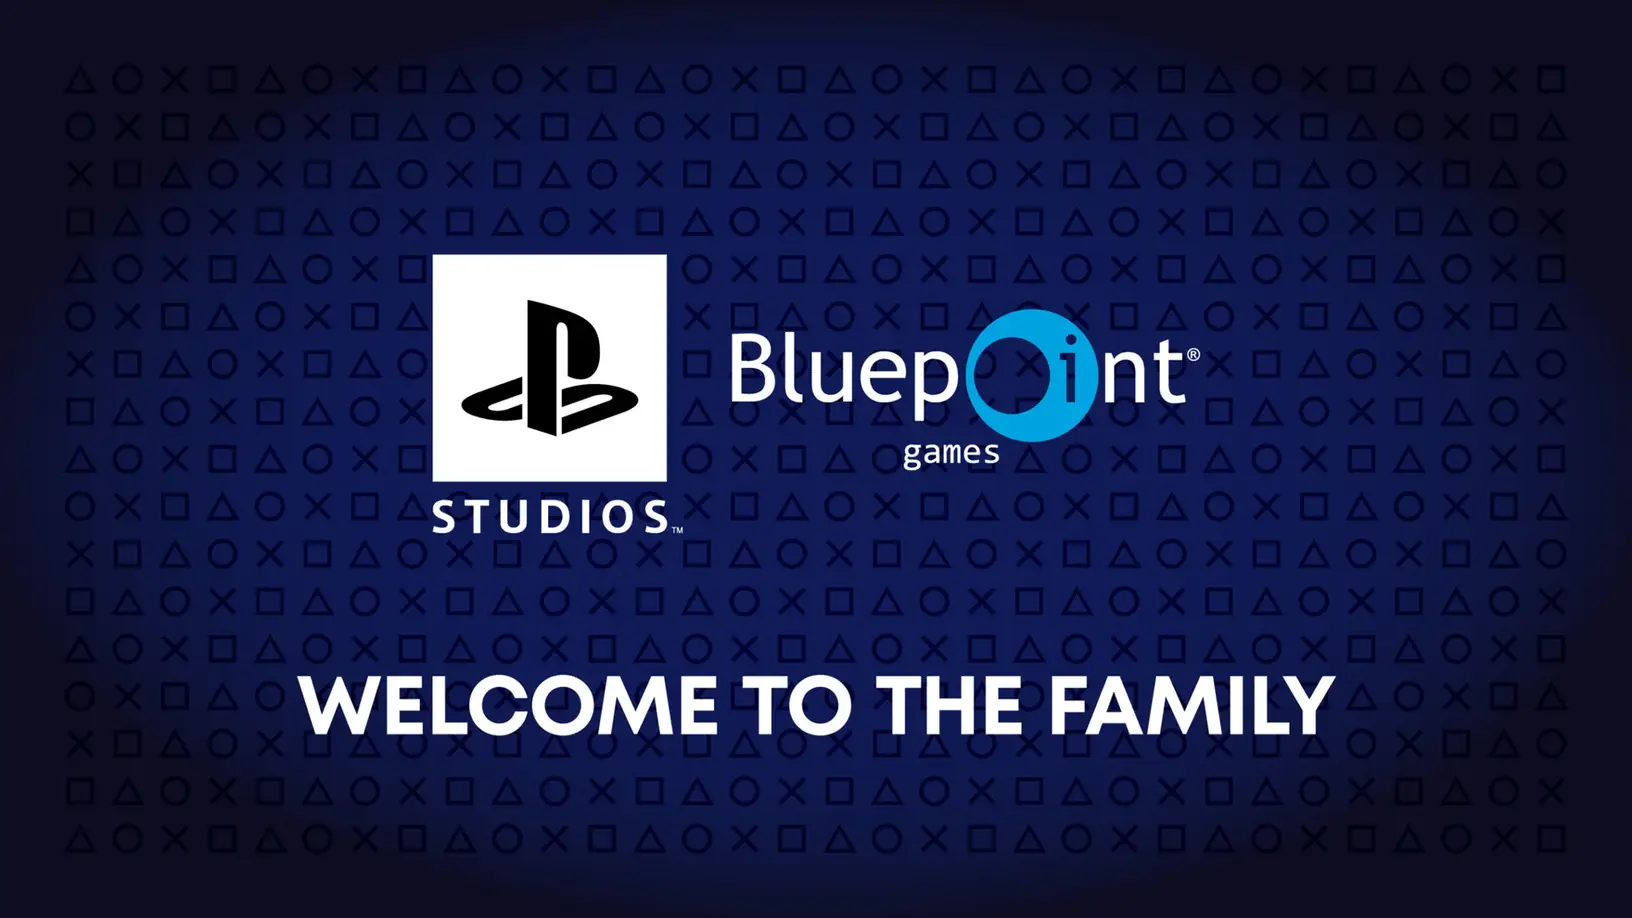 PlayStation Studios Acquires Master of Remakes, Developer Bluepoint Games